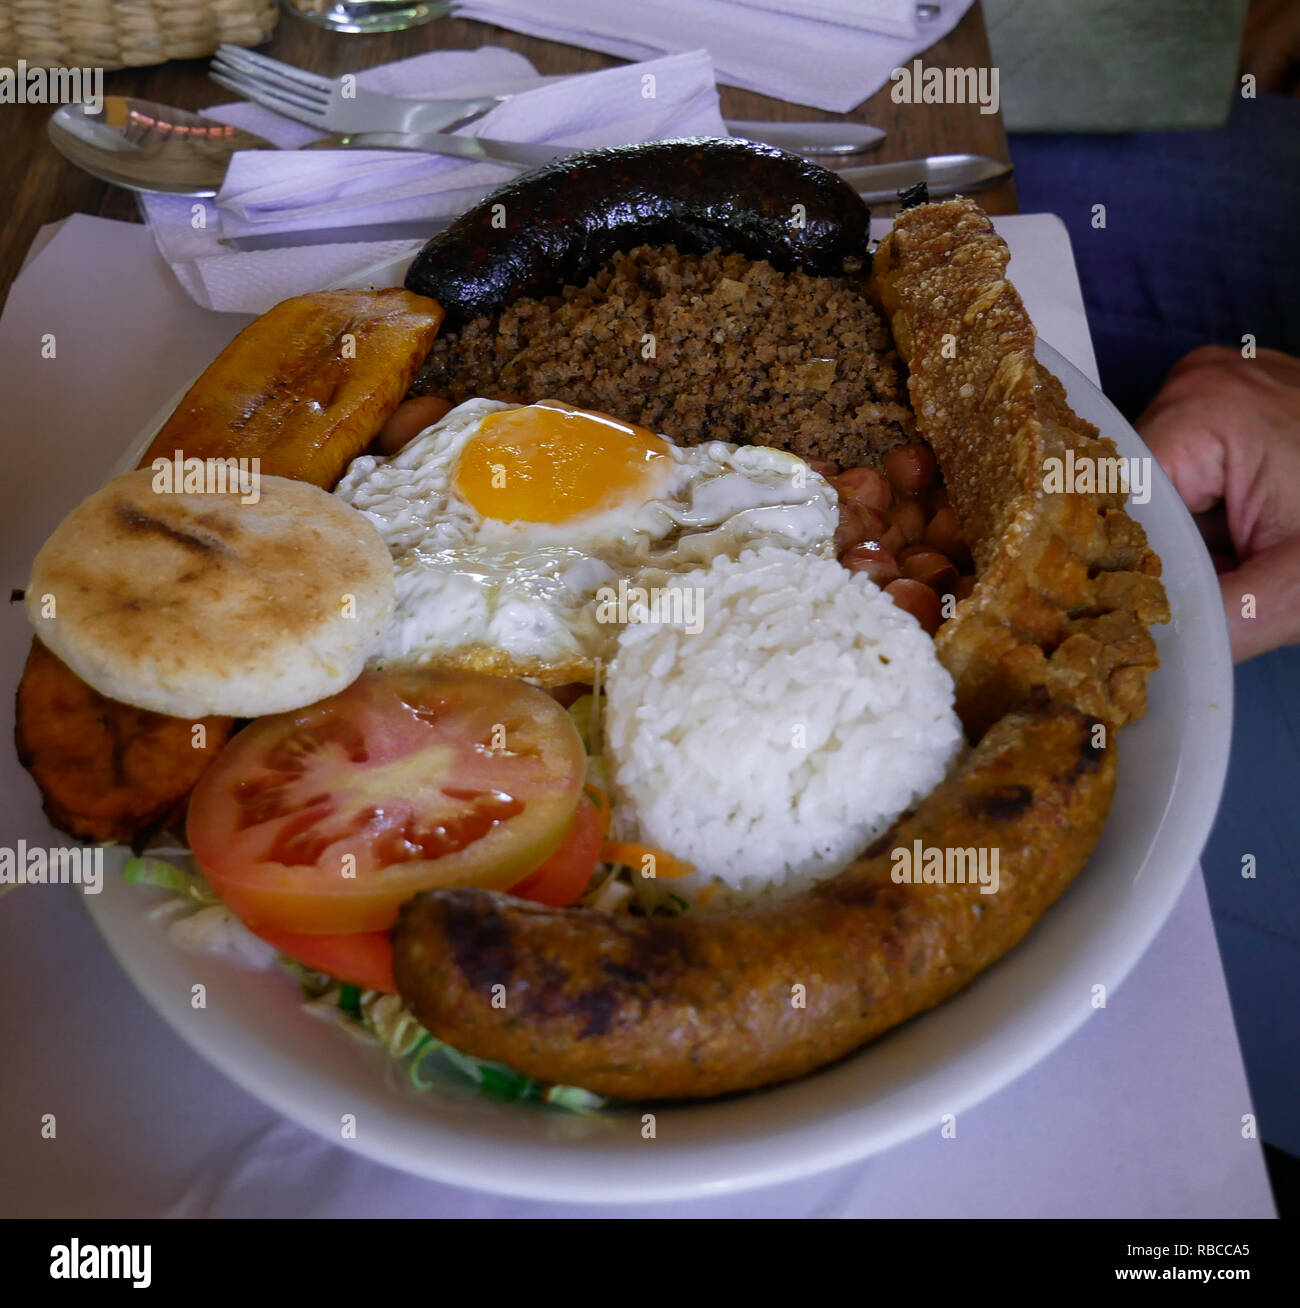 Dish of a typical food in Antioquia Colombia Bandeja Paisa with beans White rice sausage egg plantain mince meat Stock Photo